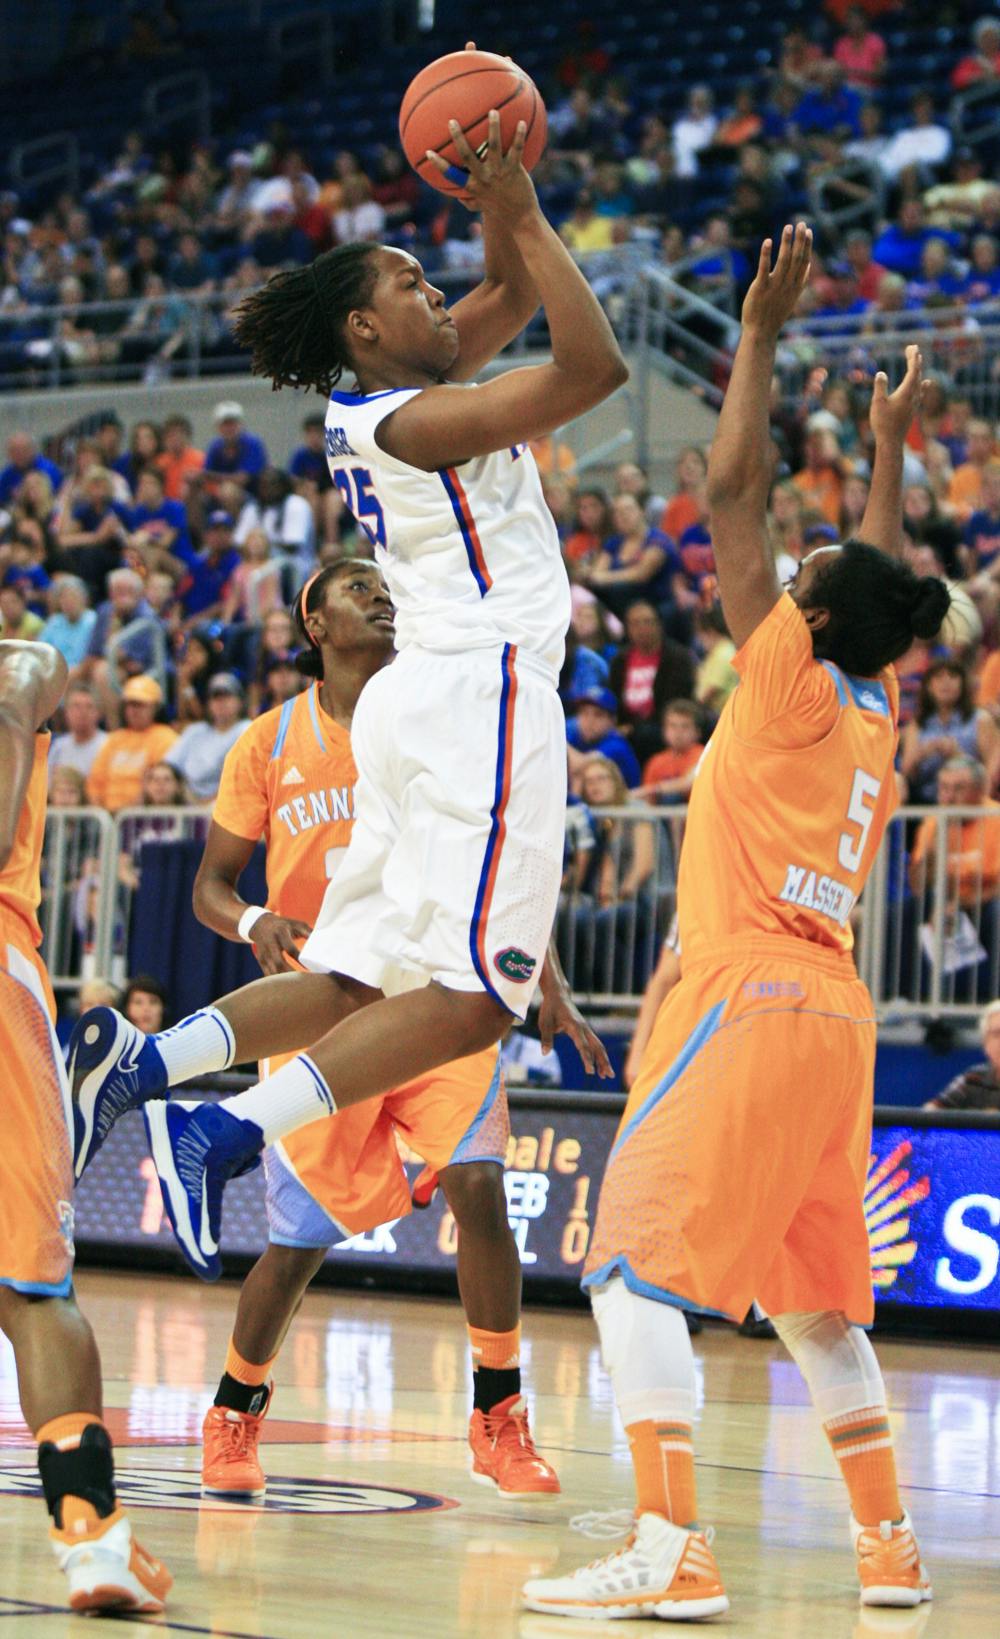 <p><span>Freshman forward Christin Mercer attempts a shot during Florida’s 78-75 overtime loss to Tennessee on Sunday in the O’Connell Center.</span></p>
<div><span><br /></span></div>